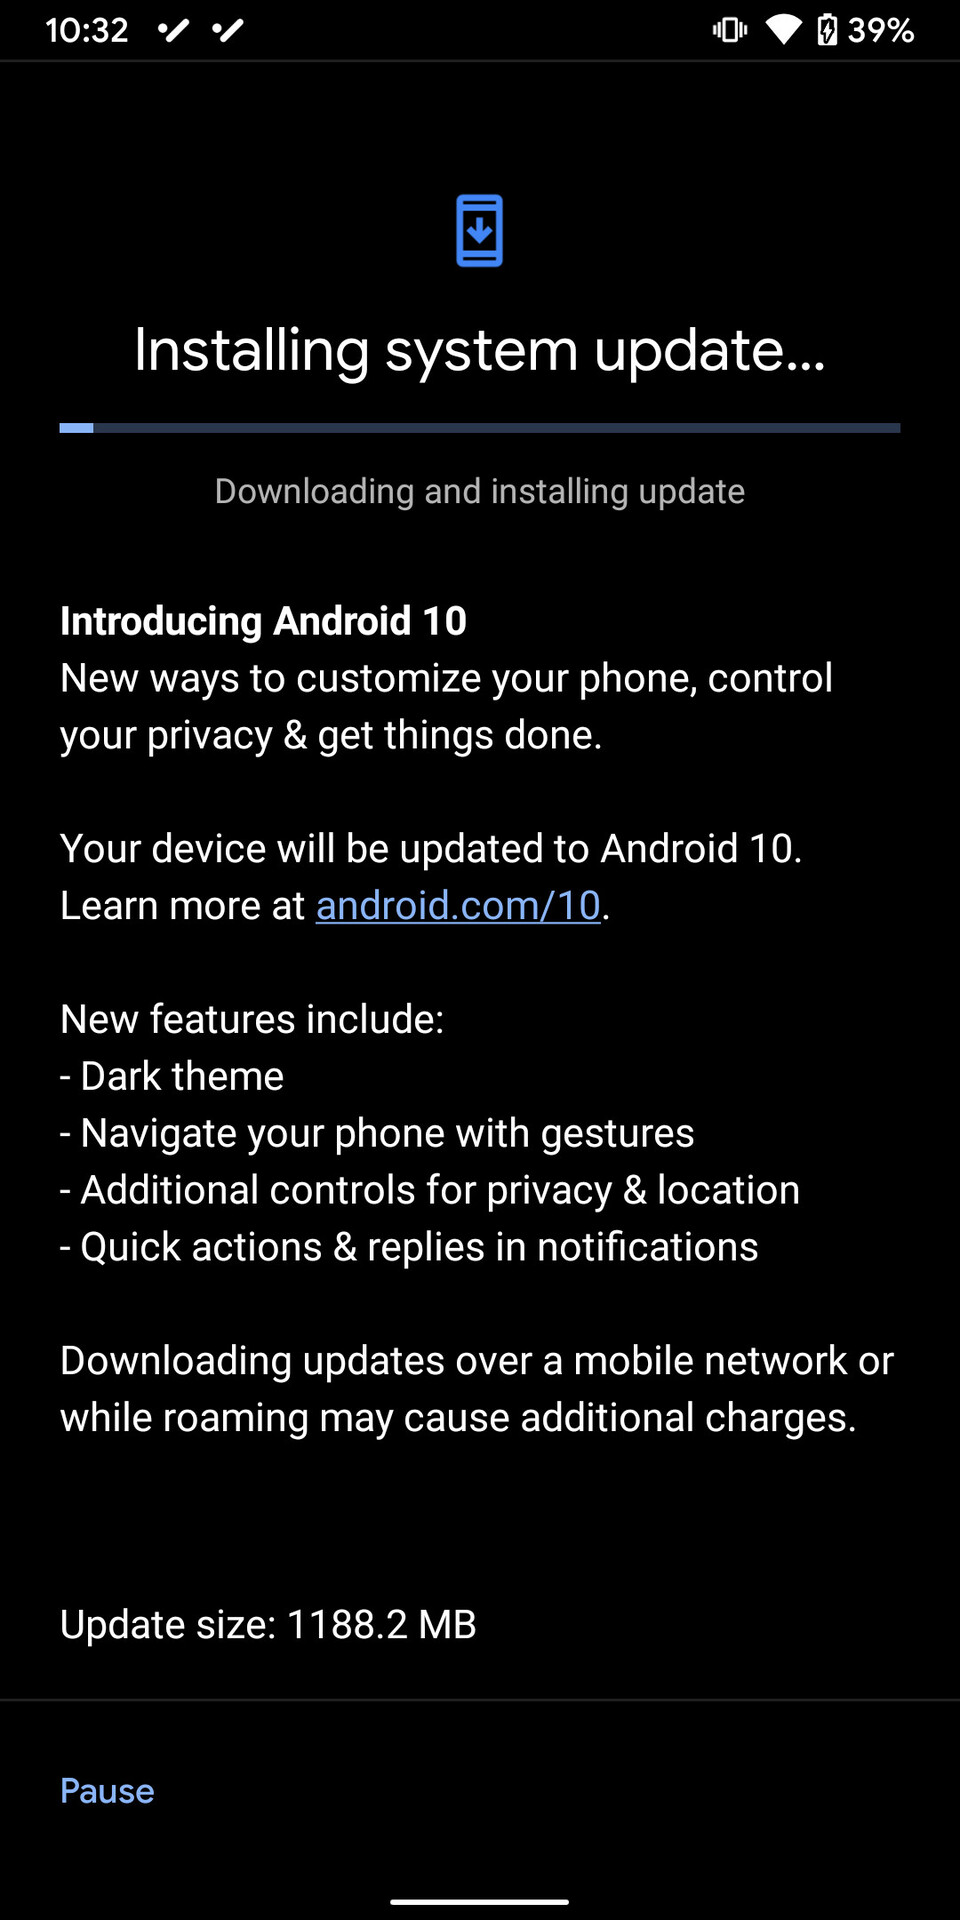 A follow-up update to Android 10 on a Pixel phone.